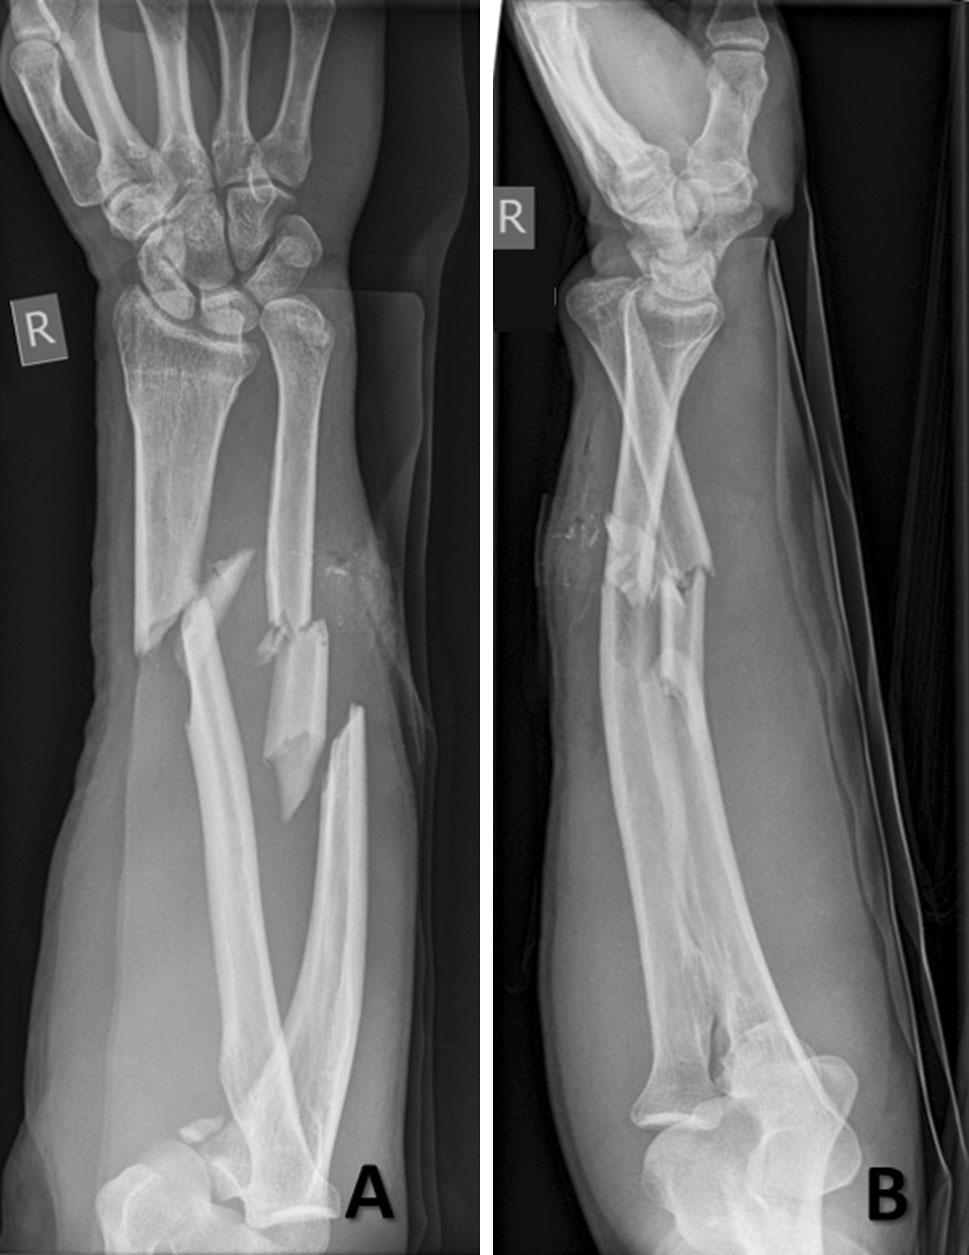 At the 12-month follow-up, the patient had Disabilities of the Arm, Shoulder and Hand (DASH) score of 10. X-rays and CT showed sufficient callus formation (Fig.